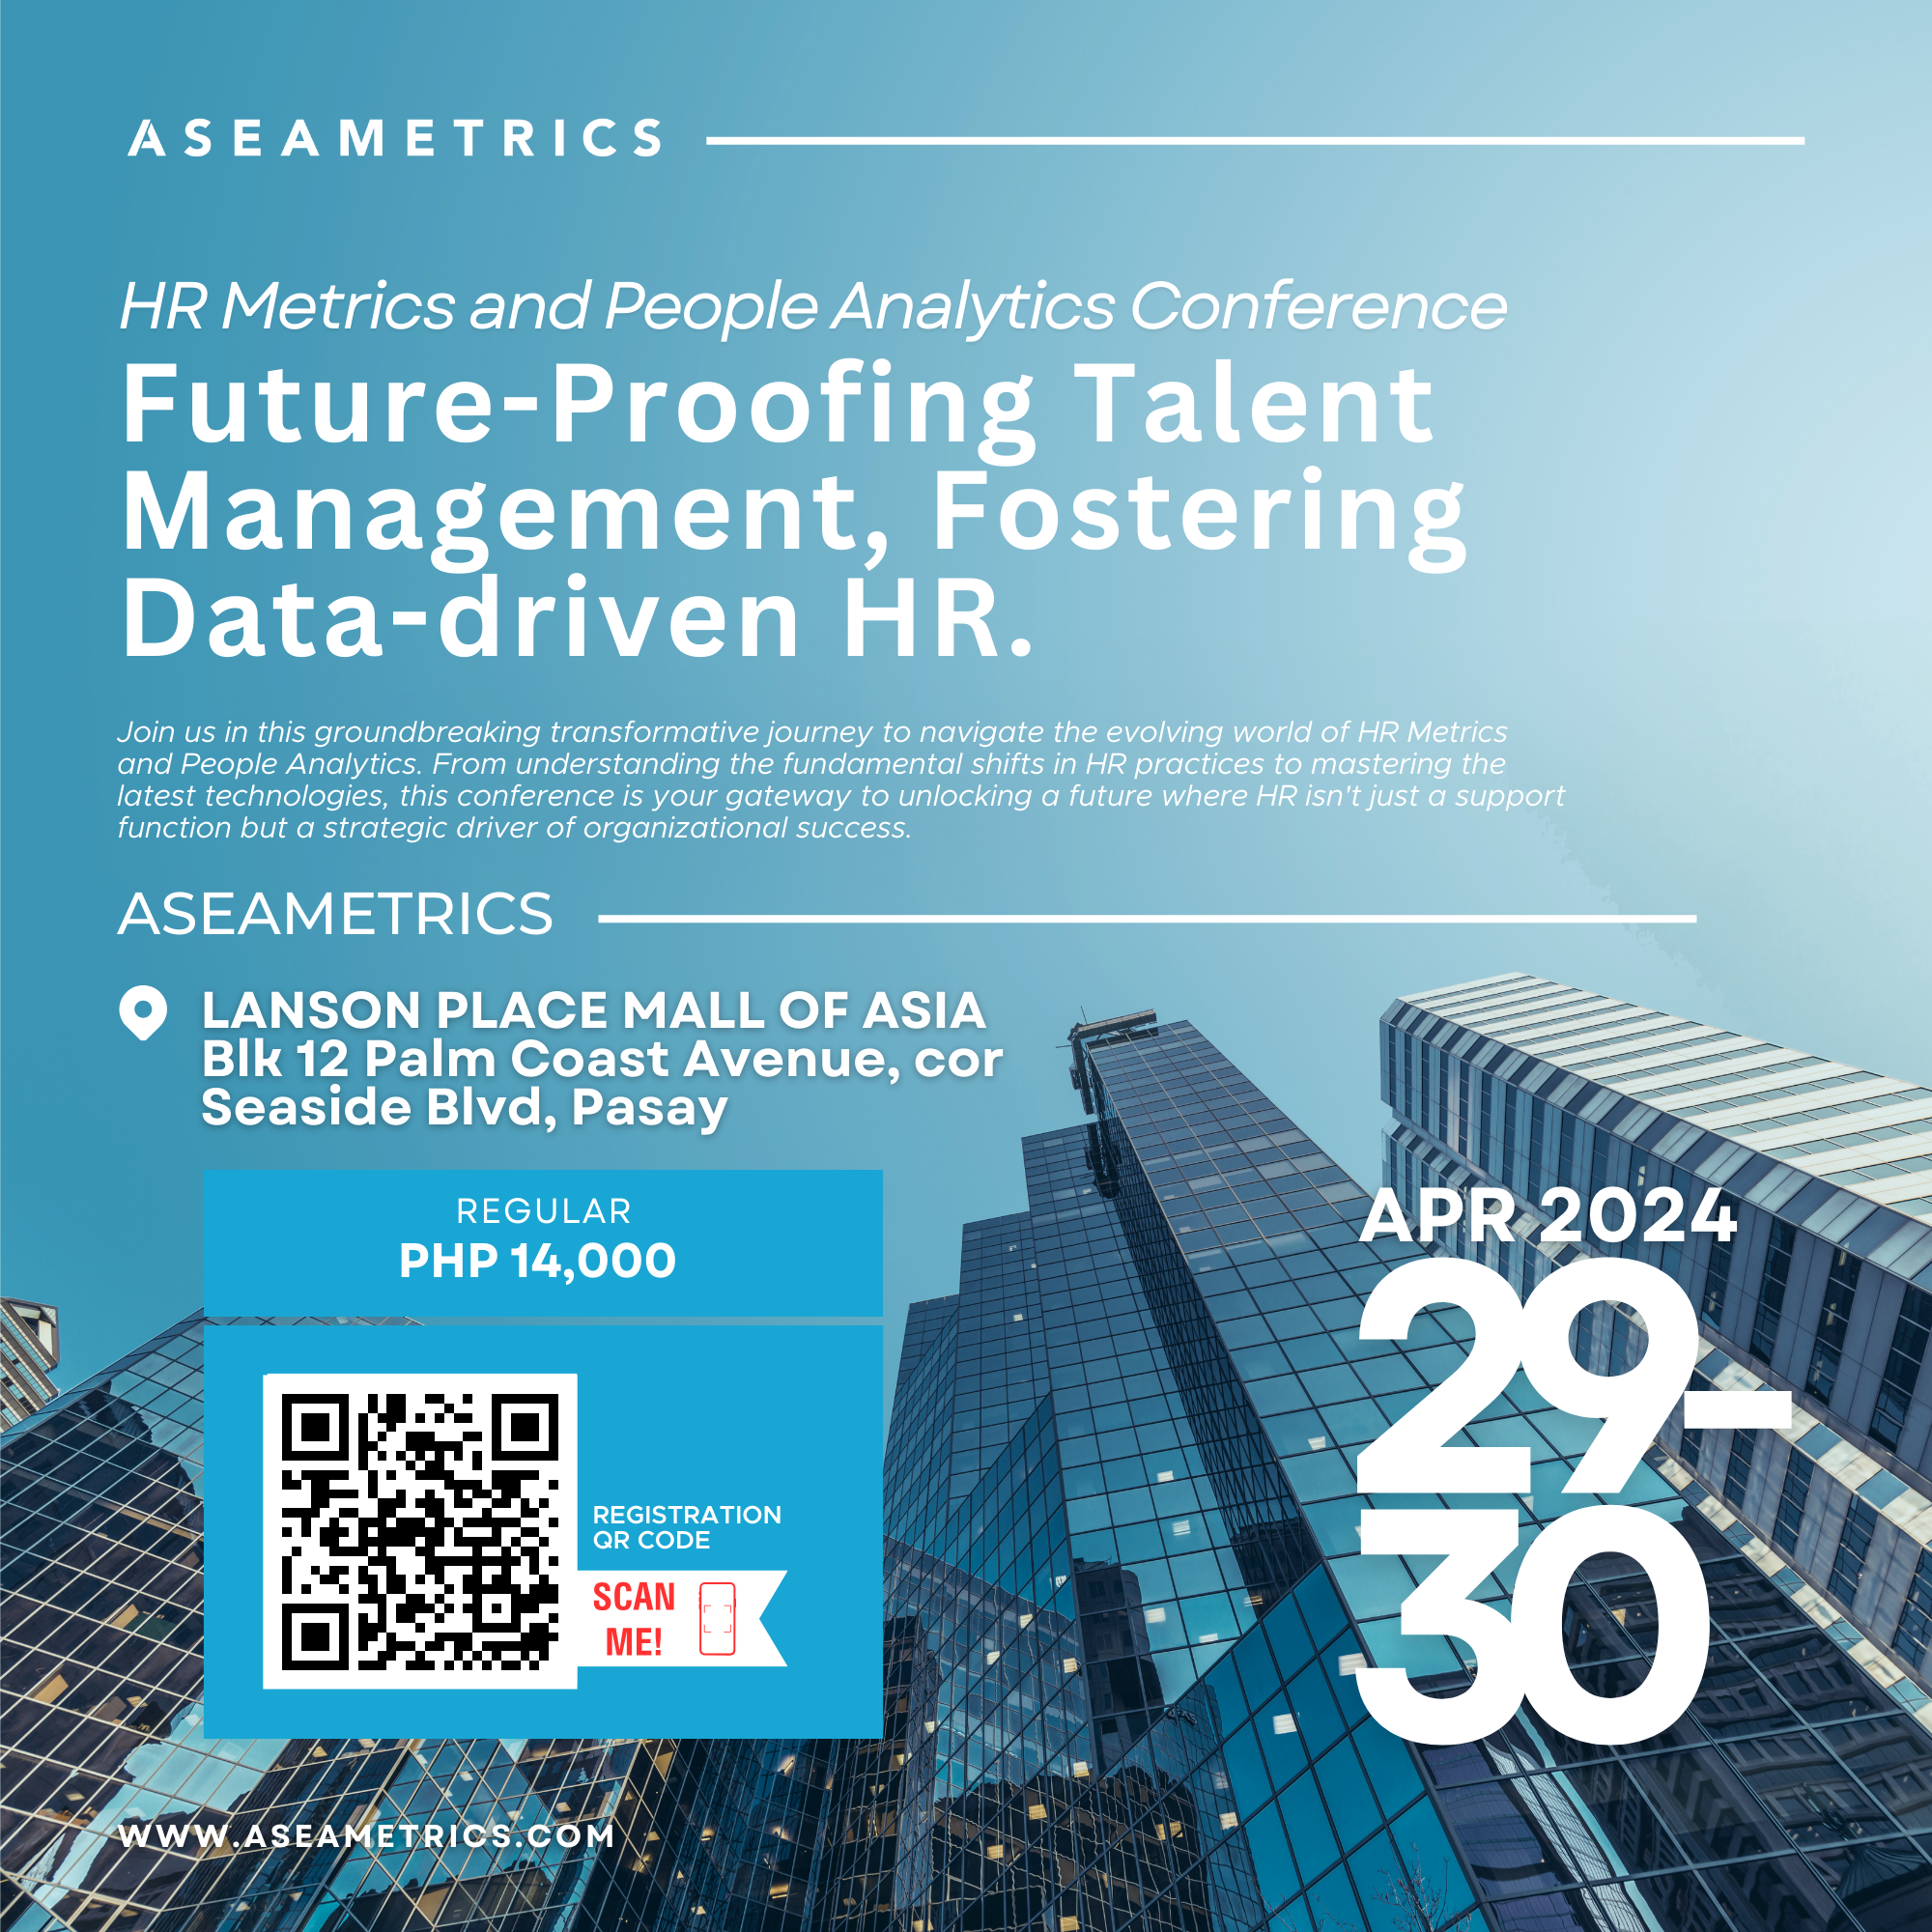 HR METRICS and PEOPLE ANALYTICS CONFERENCE